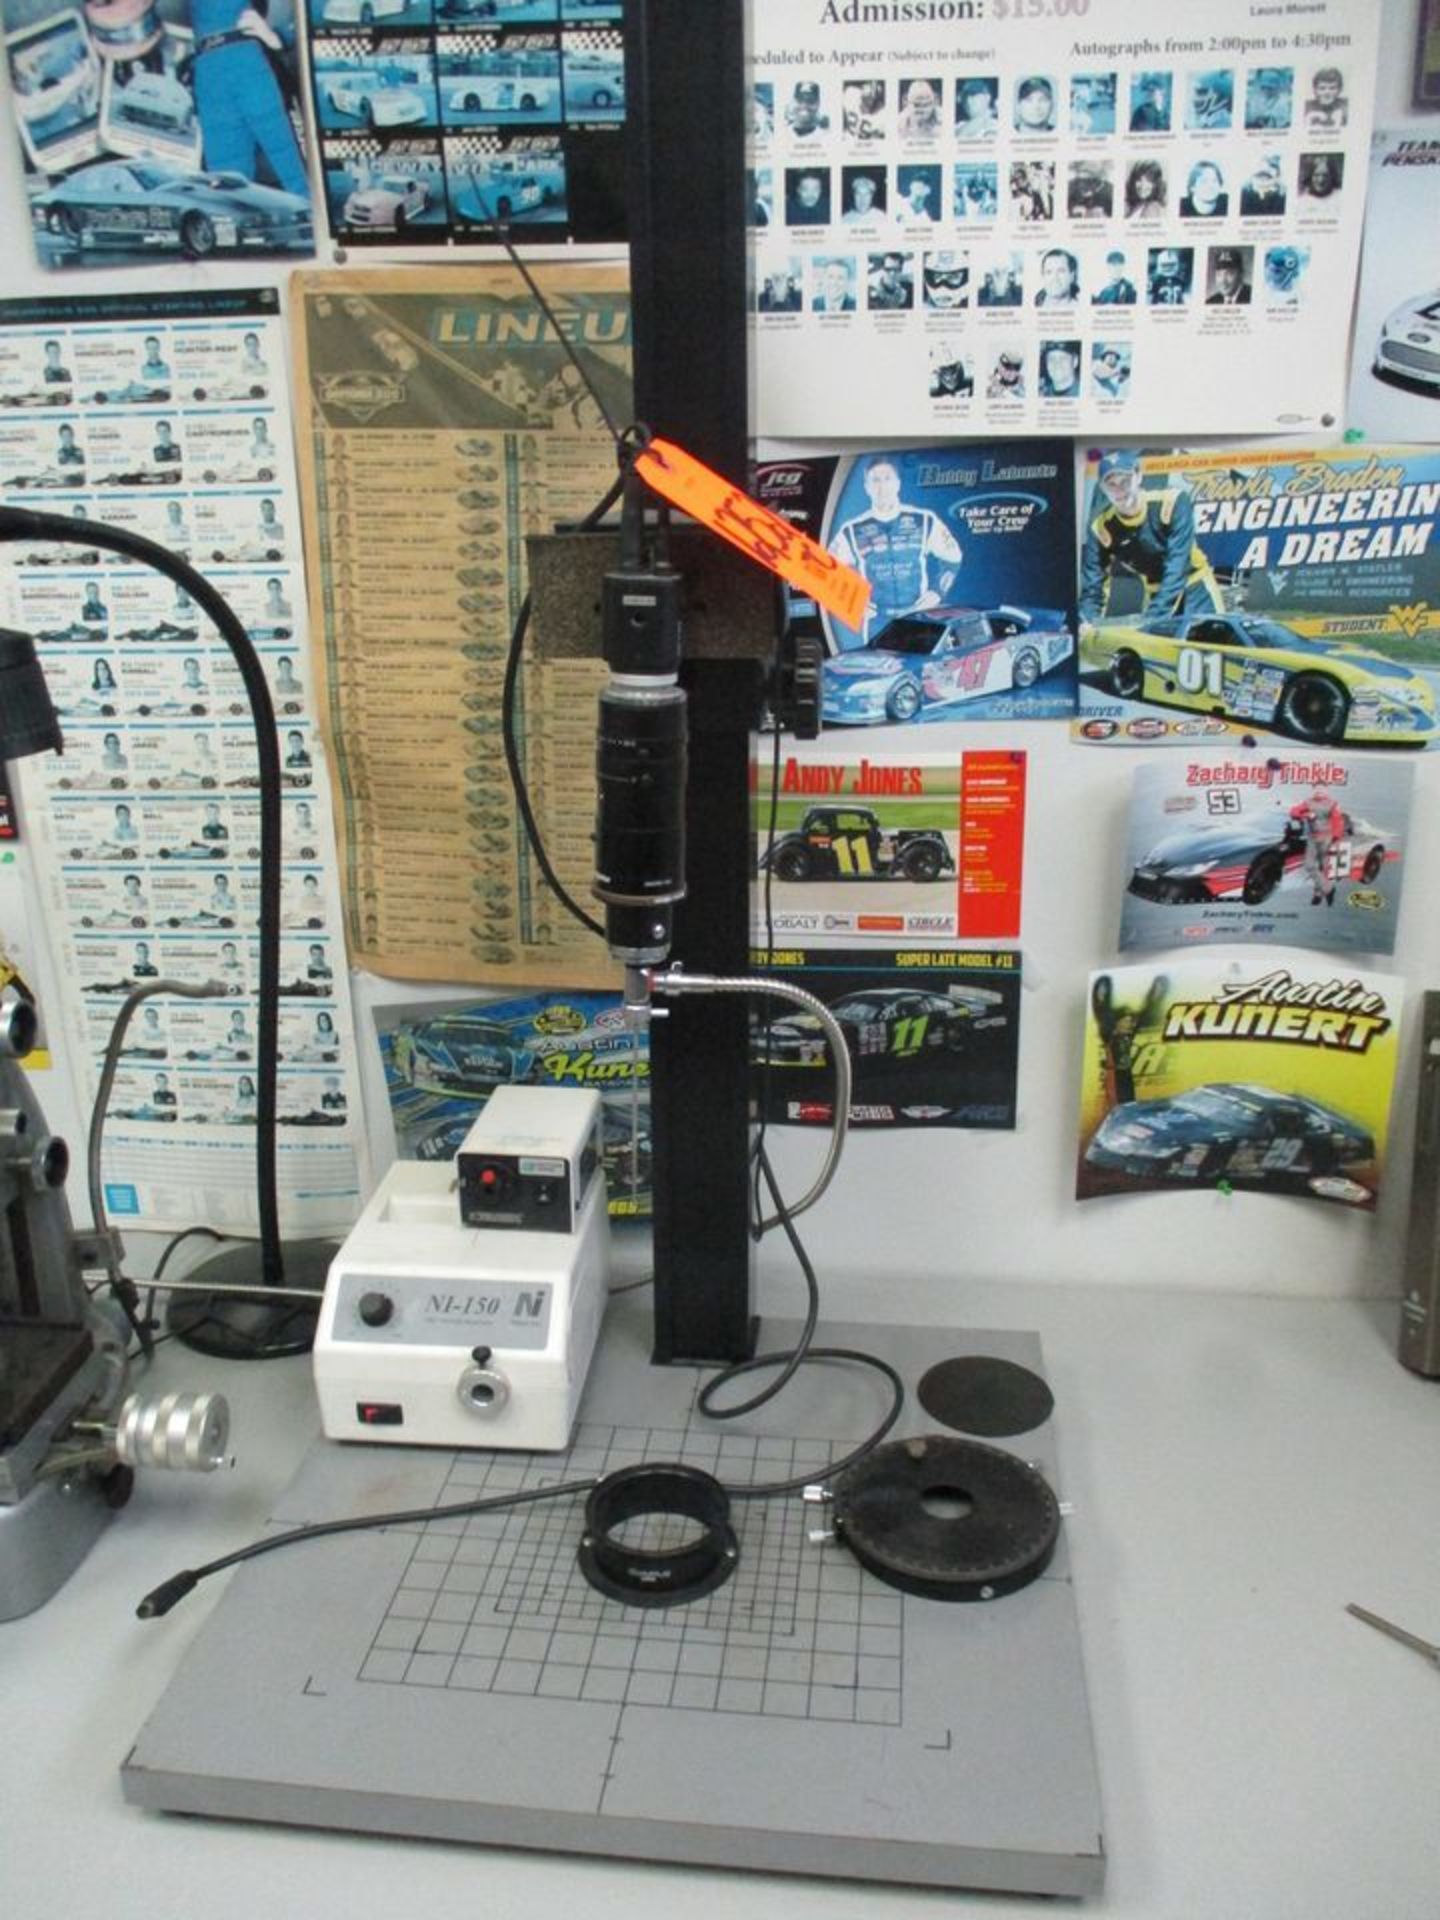 Bencher Copy Mate II Fluorescent Tabletop Producer with RTSC LCL-211H Probe and Nikon NI-150 High